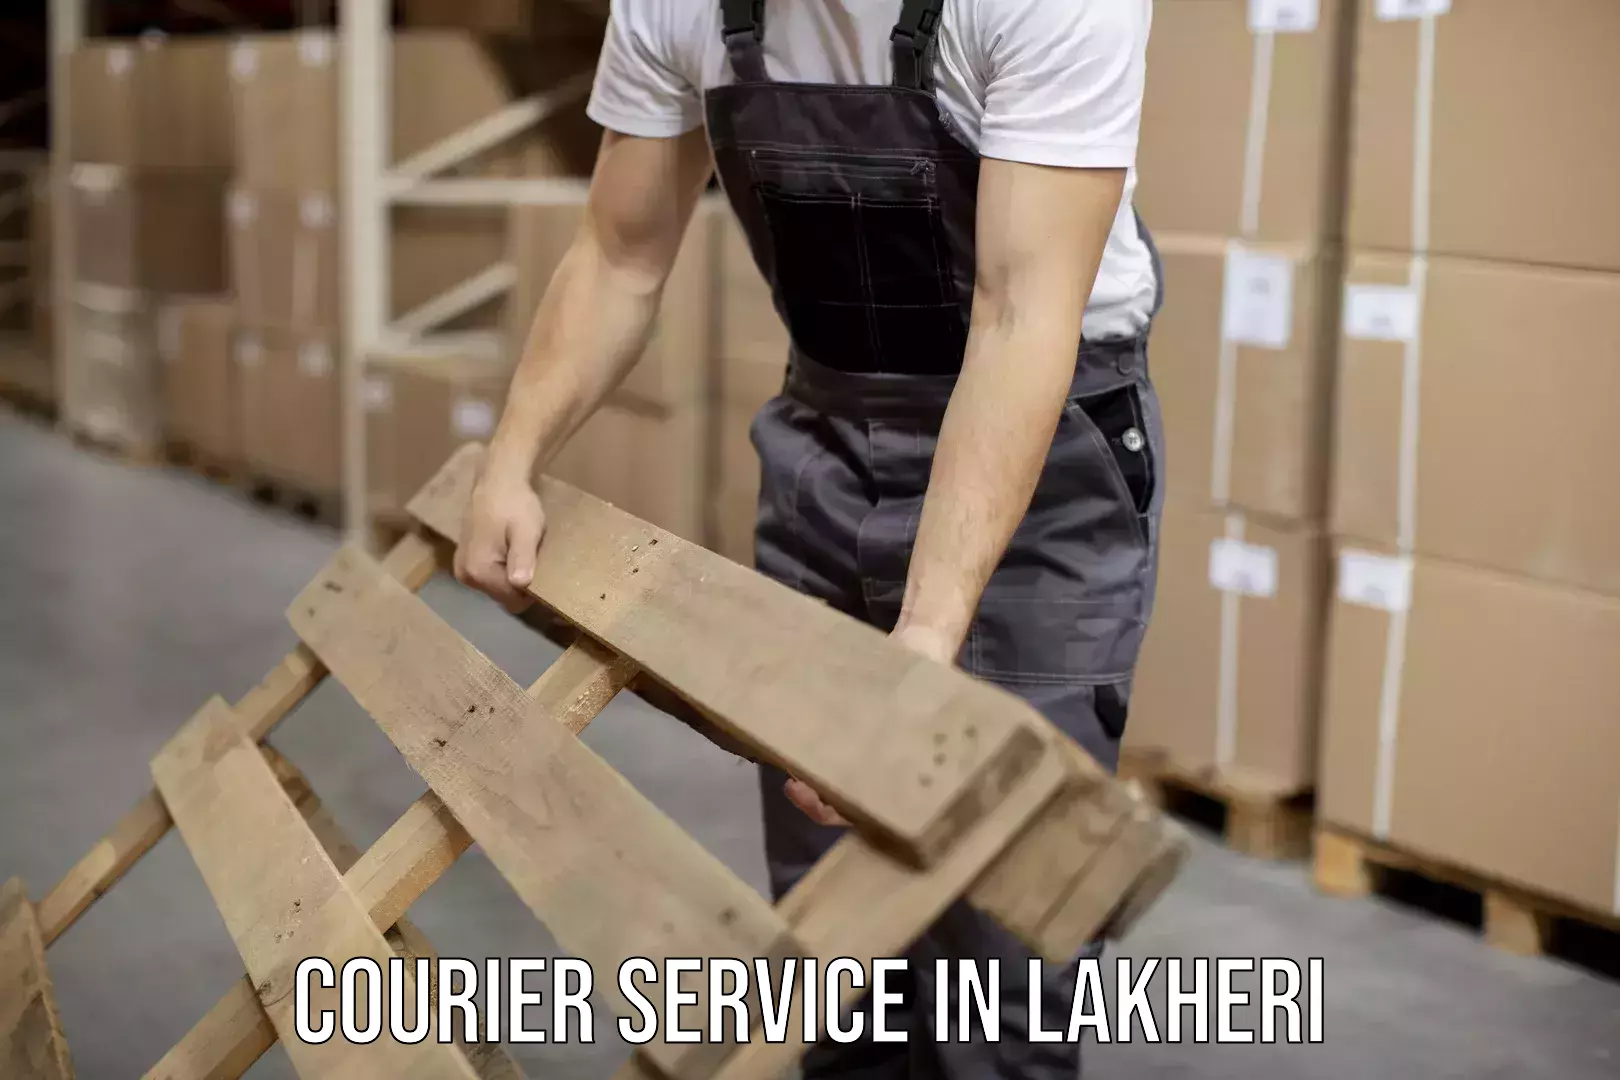 24/7 courier service in Lakheri